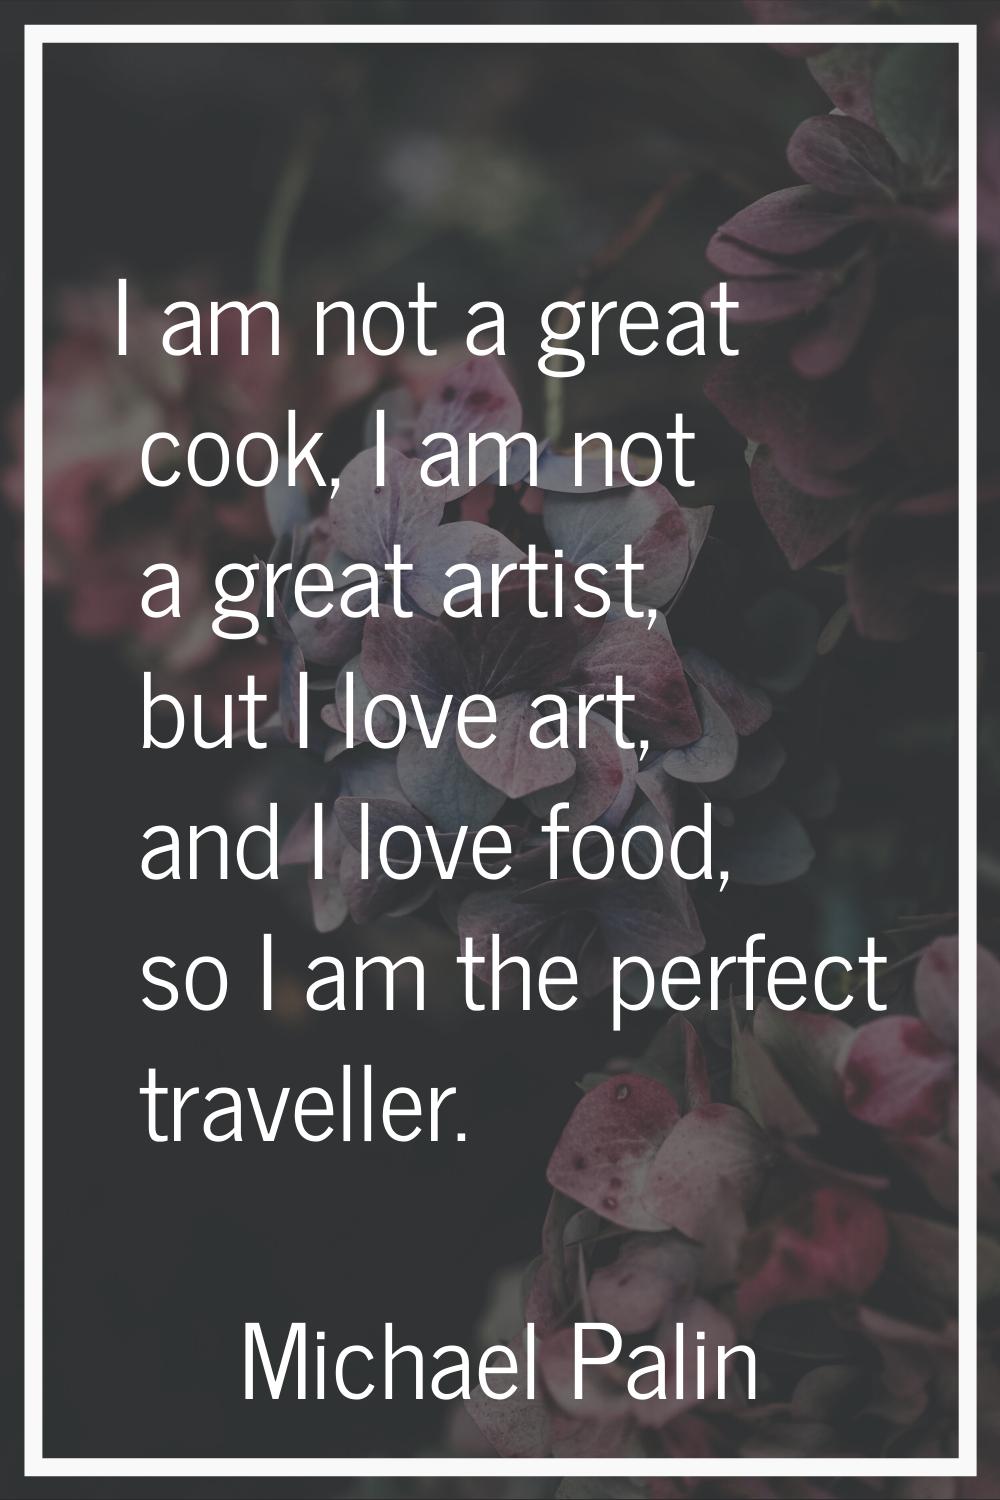 I am not a great cook, I am not a great artist, but I love art, and I love food, so I am the perfec